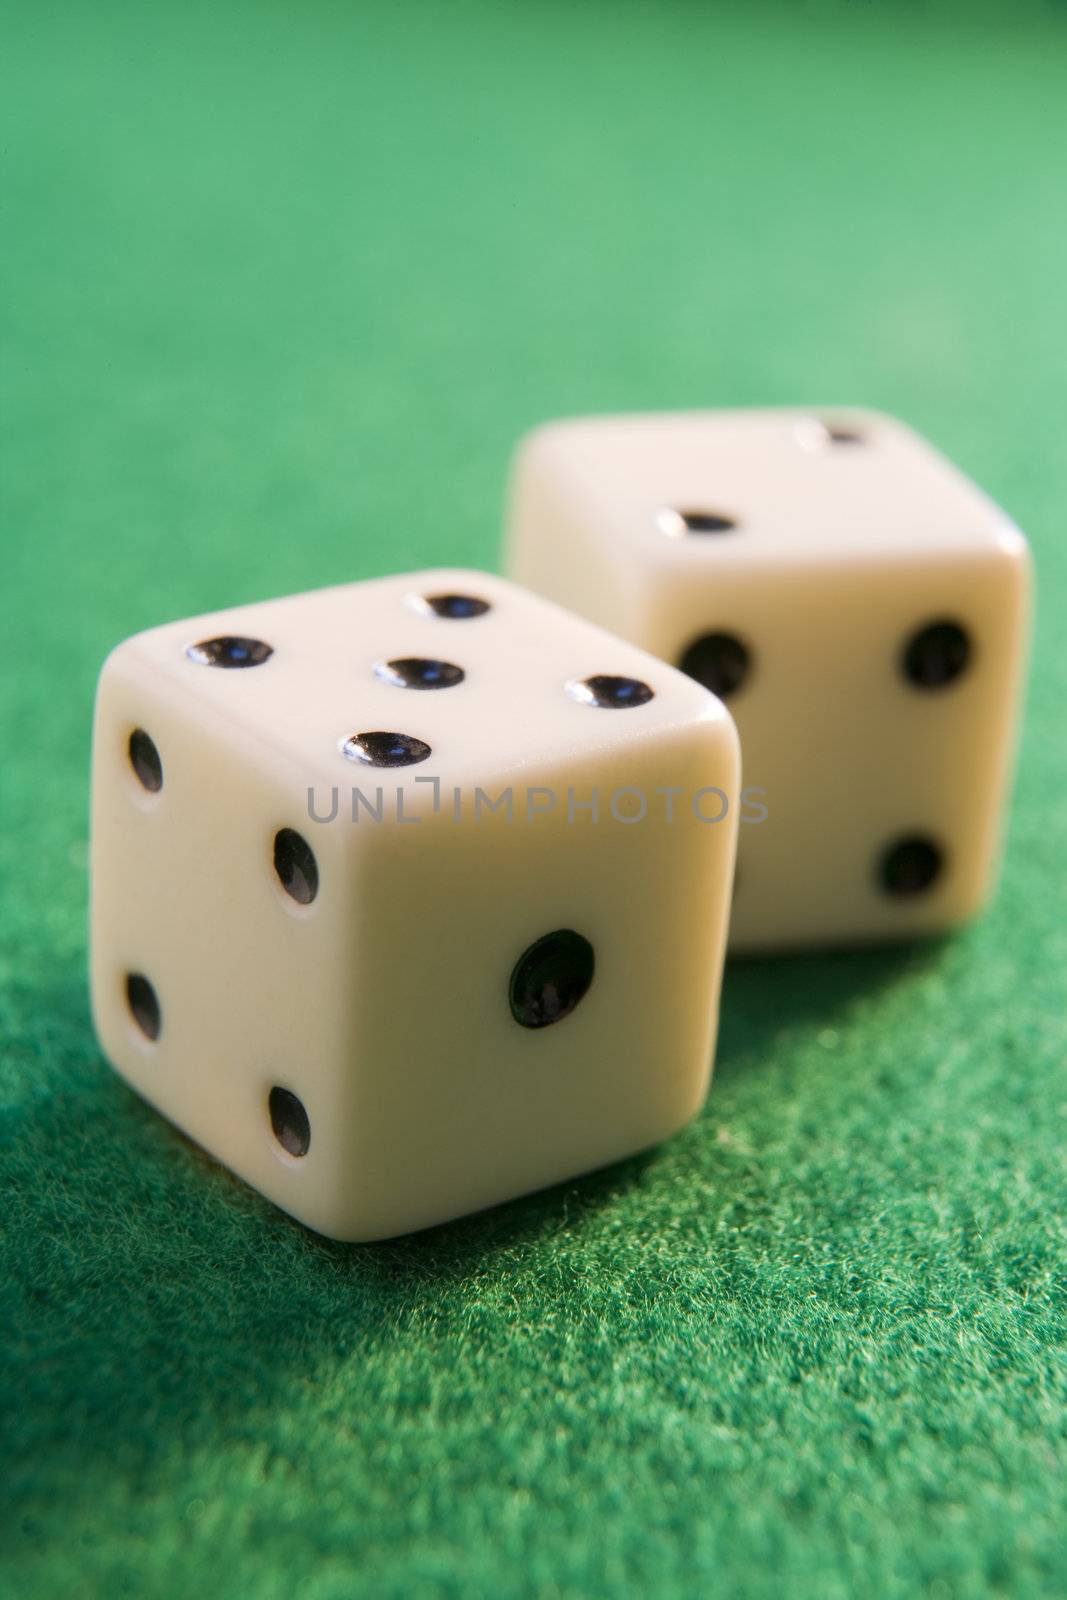 pair of dice on a green baize surface